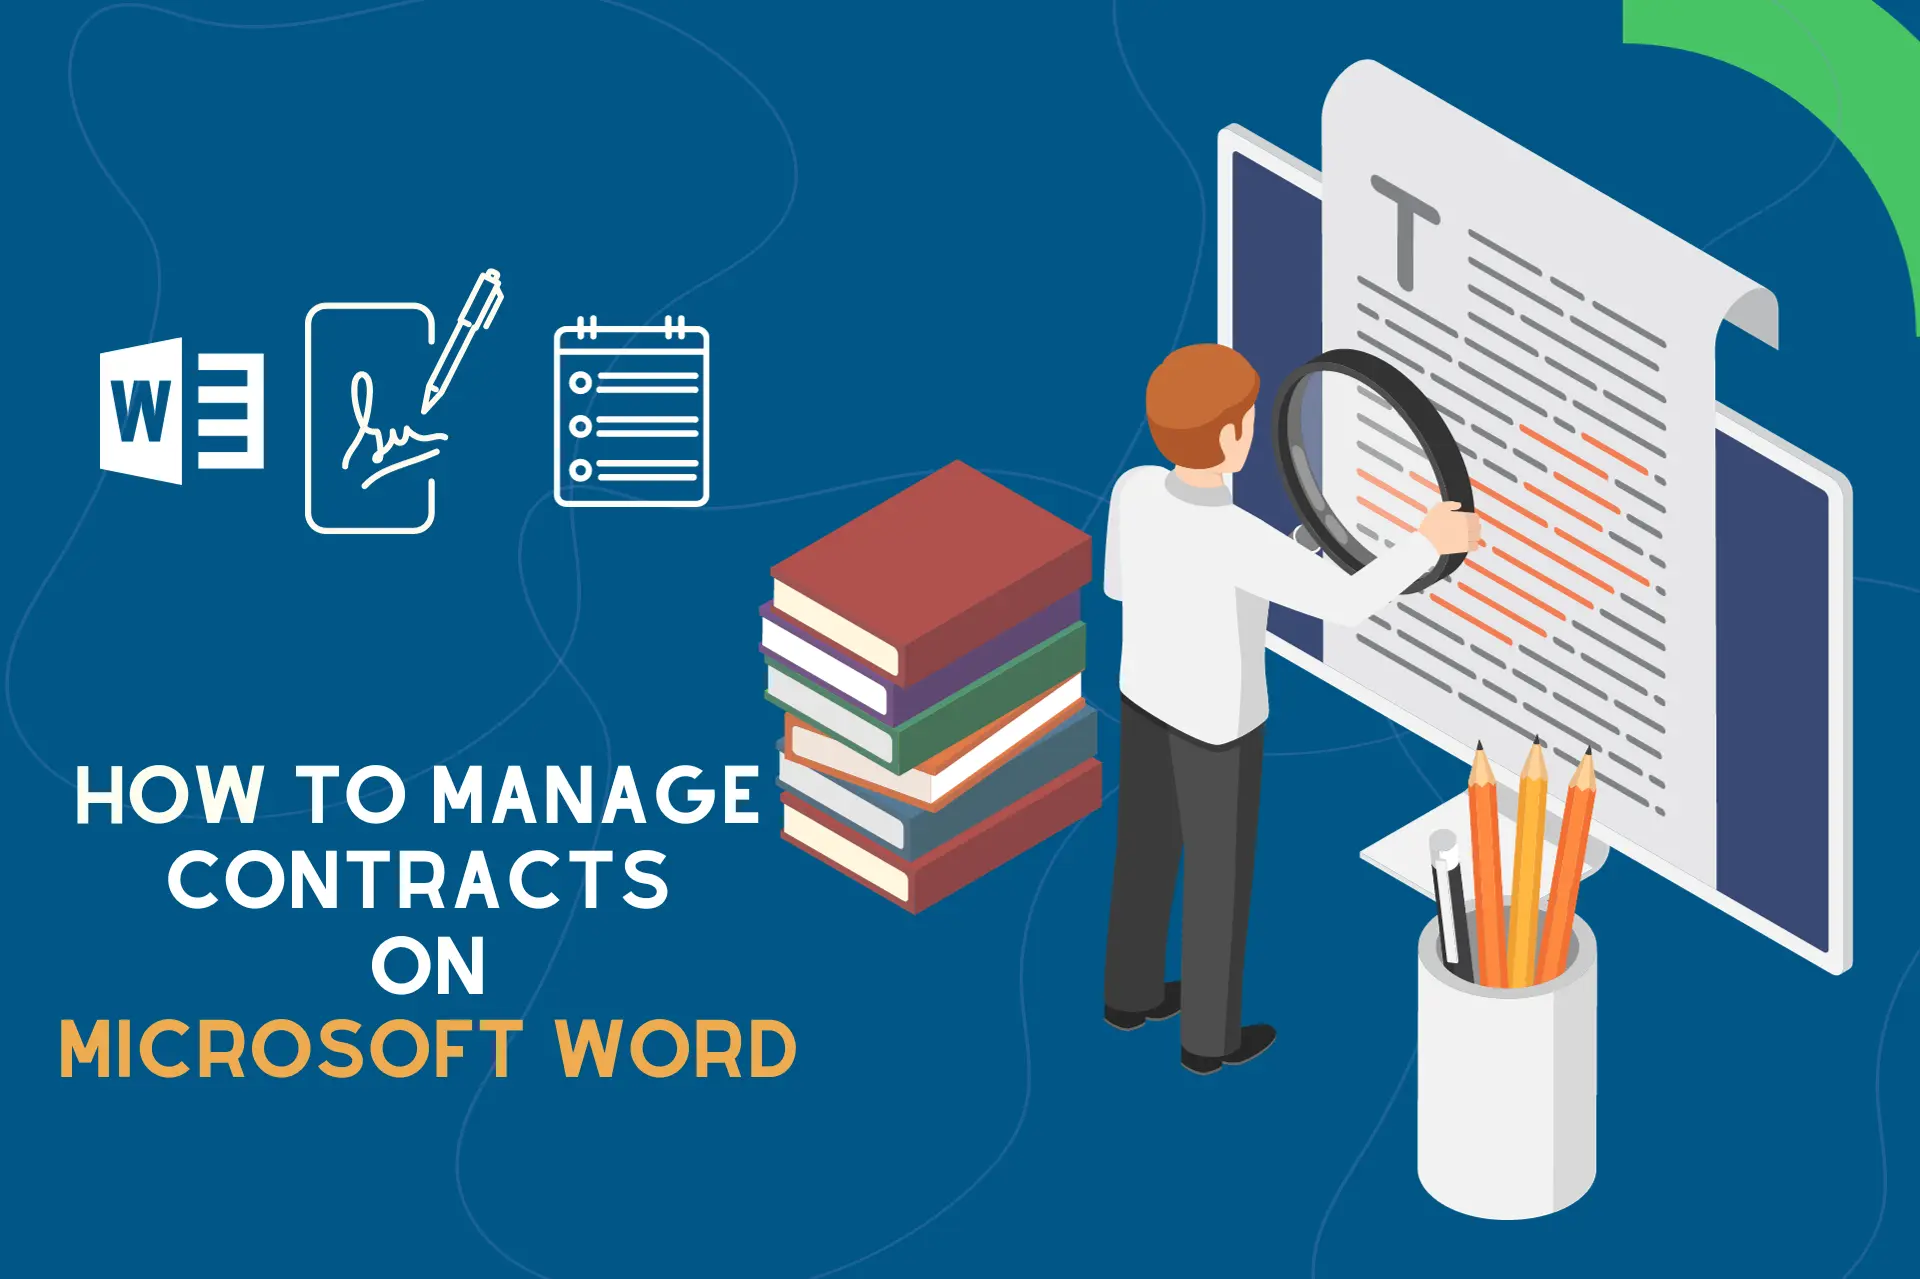 How To Manage A Contract On Microsoft Word